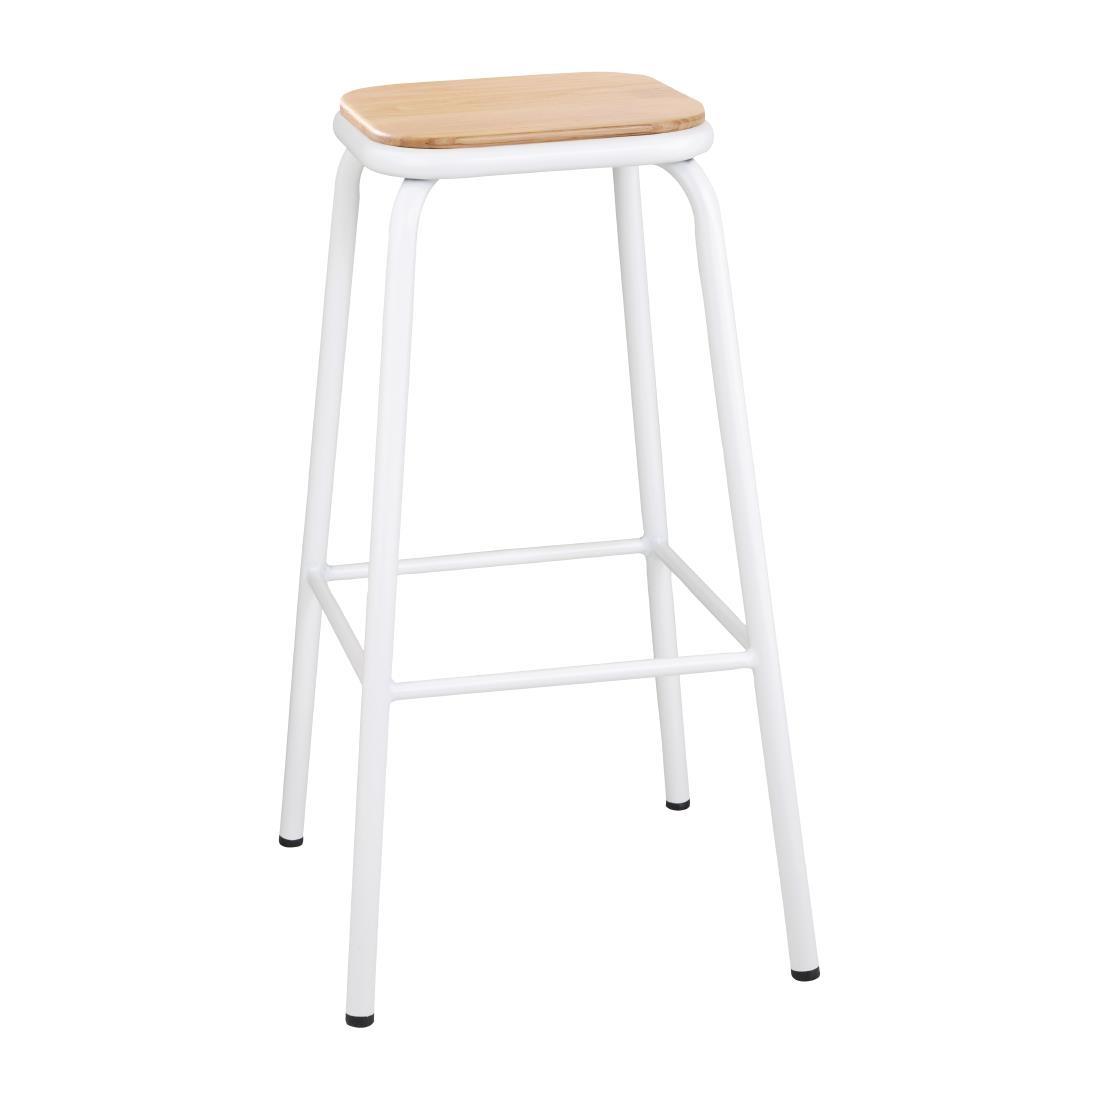 Bolero Cantina High Stools with Wooden Seat Pad White (Pack of 4) - FB939  - 1